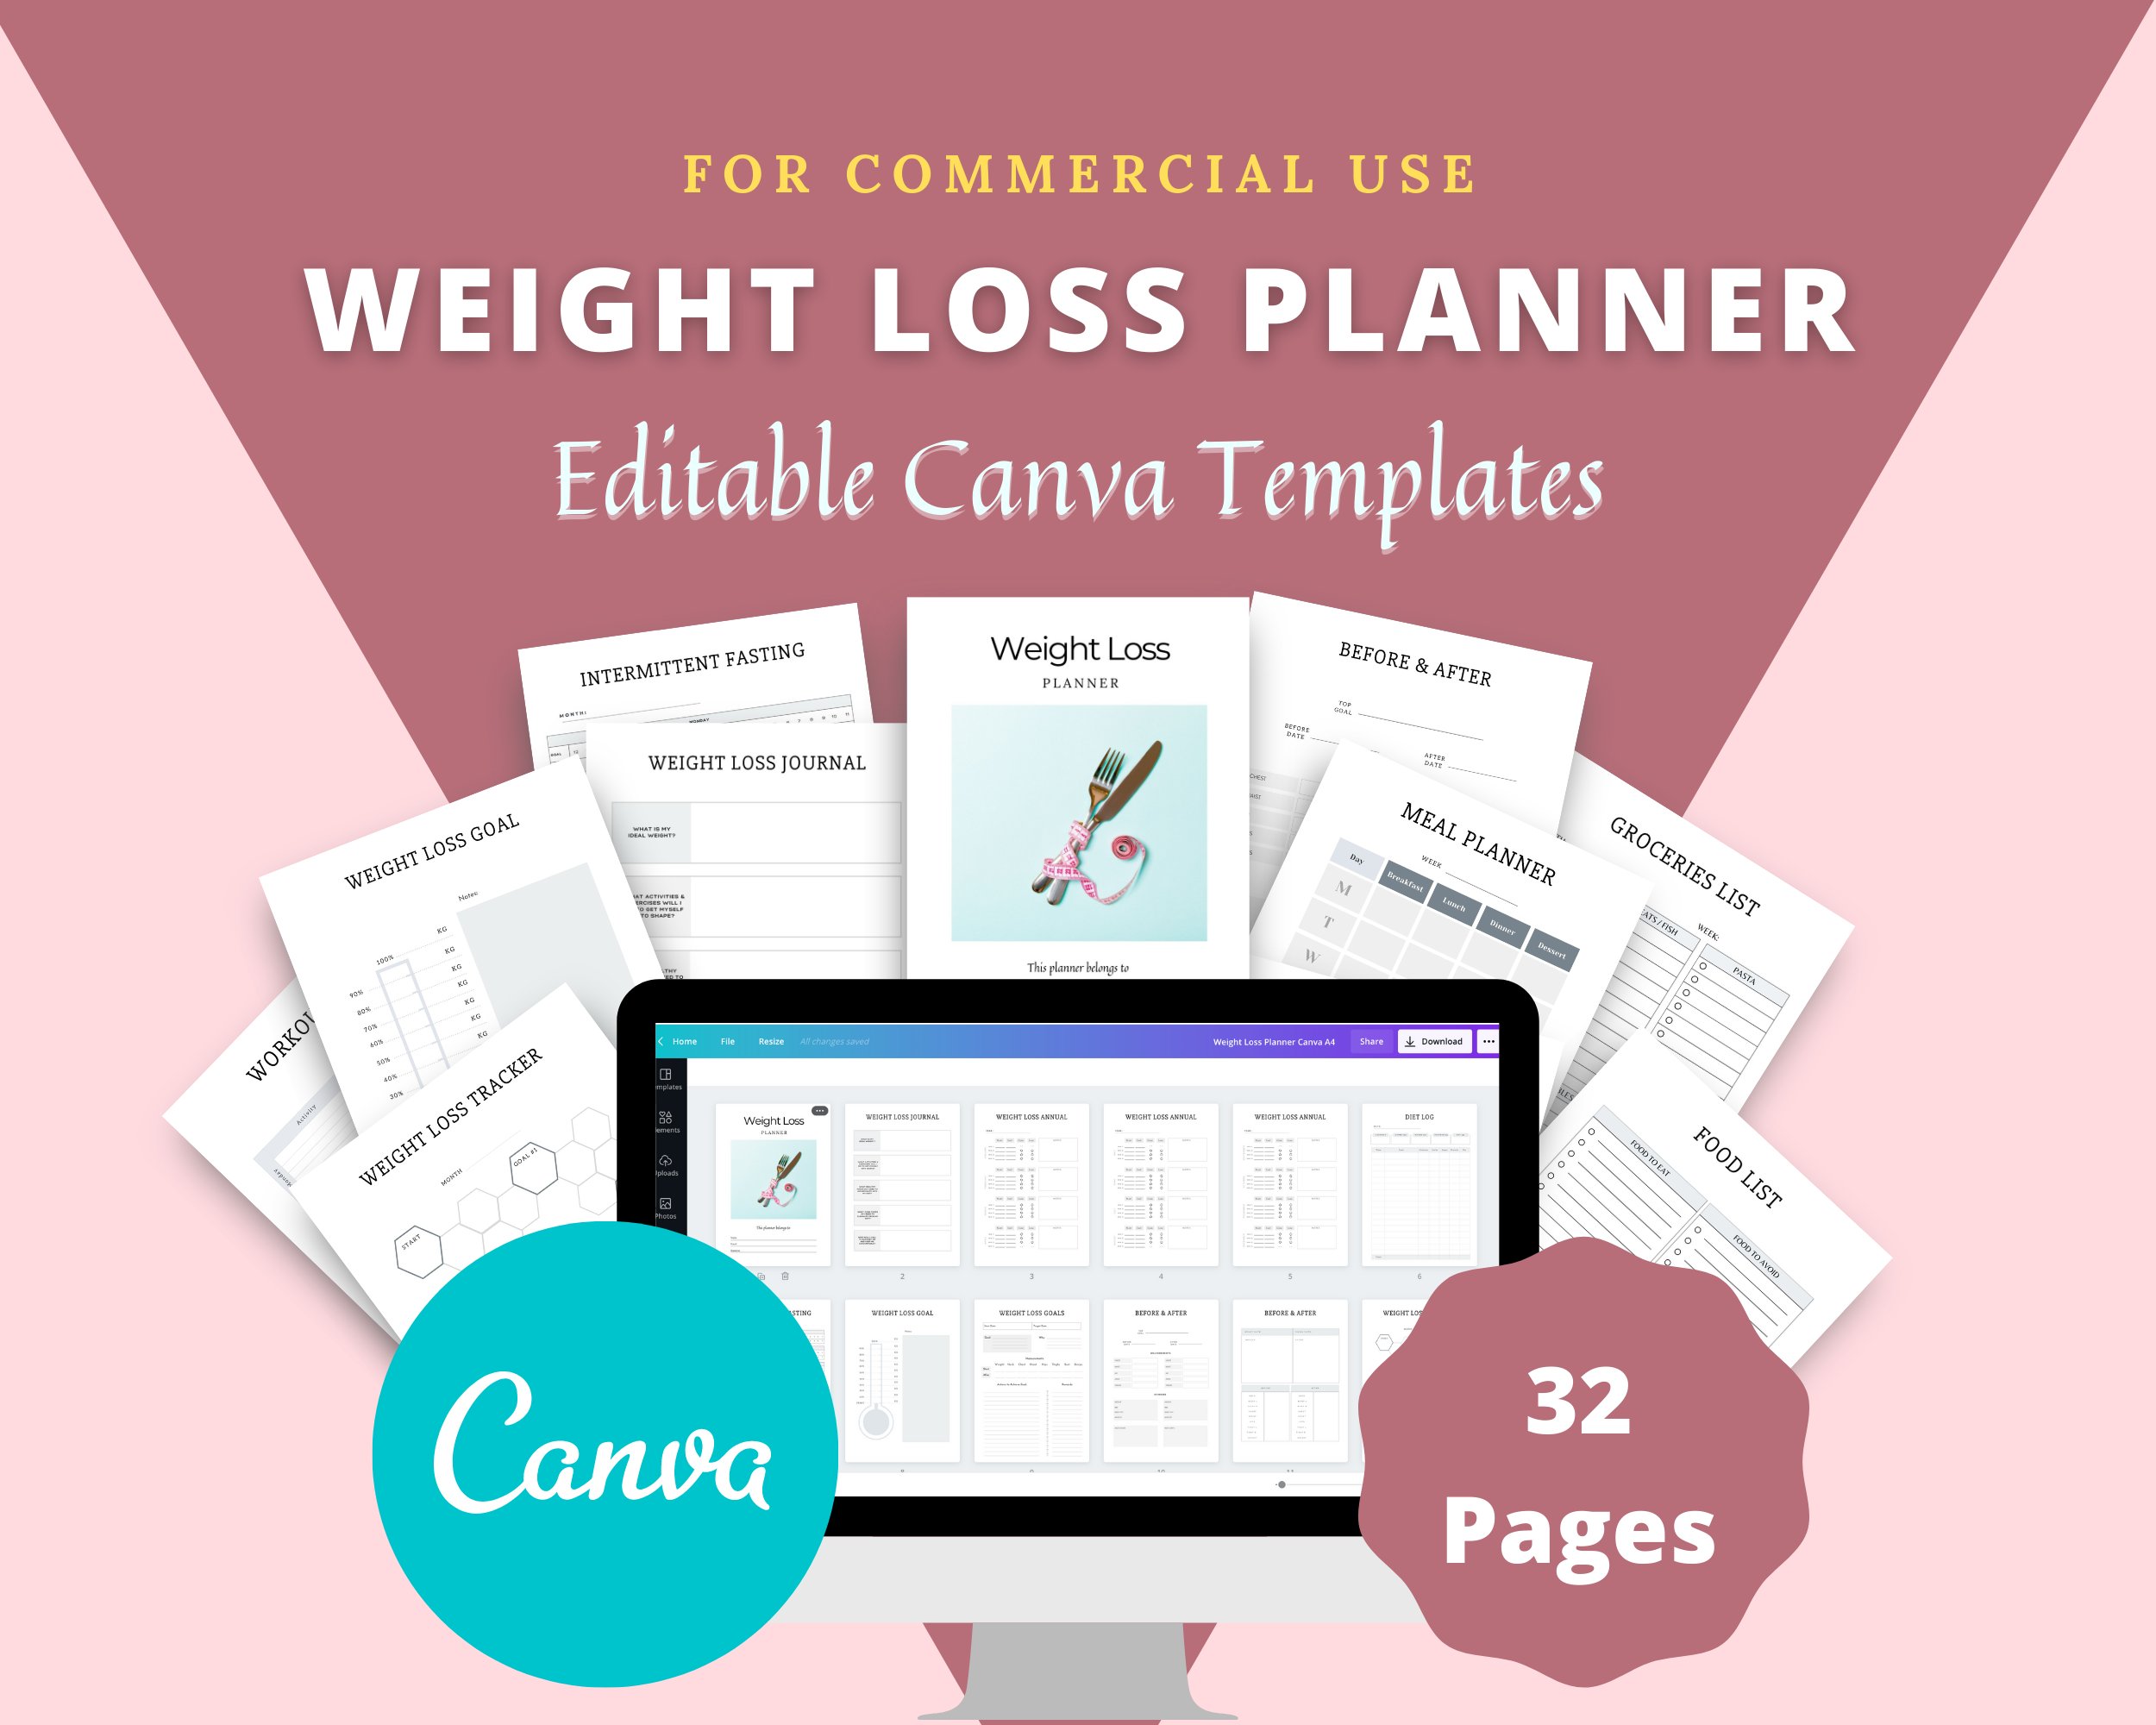 Editable Weight Loss Planner in Canva | Commercial Use